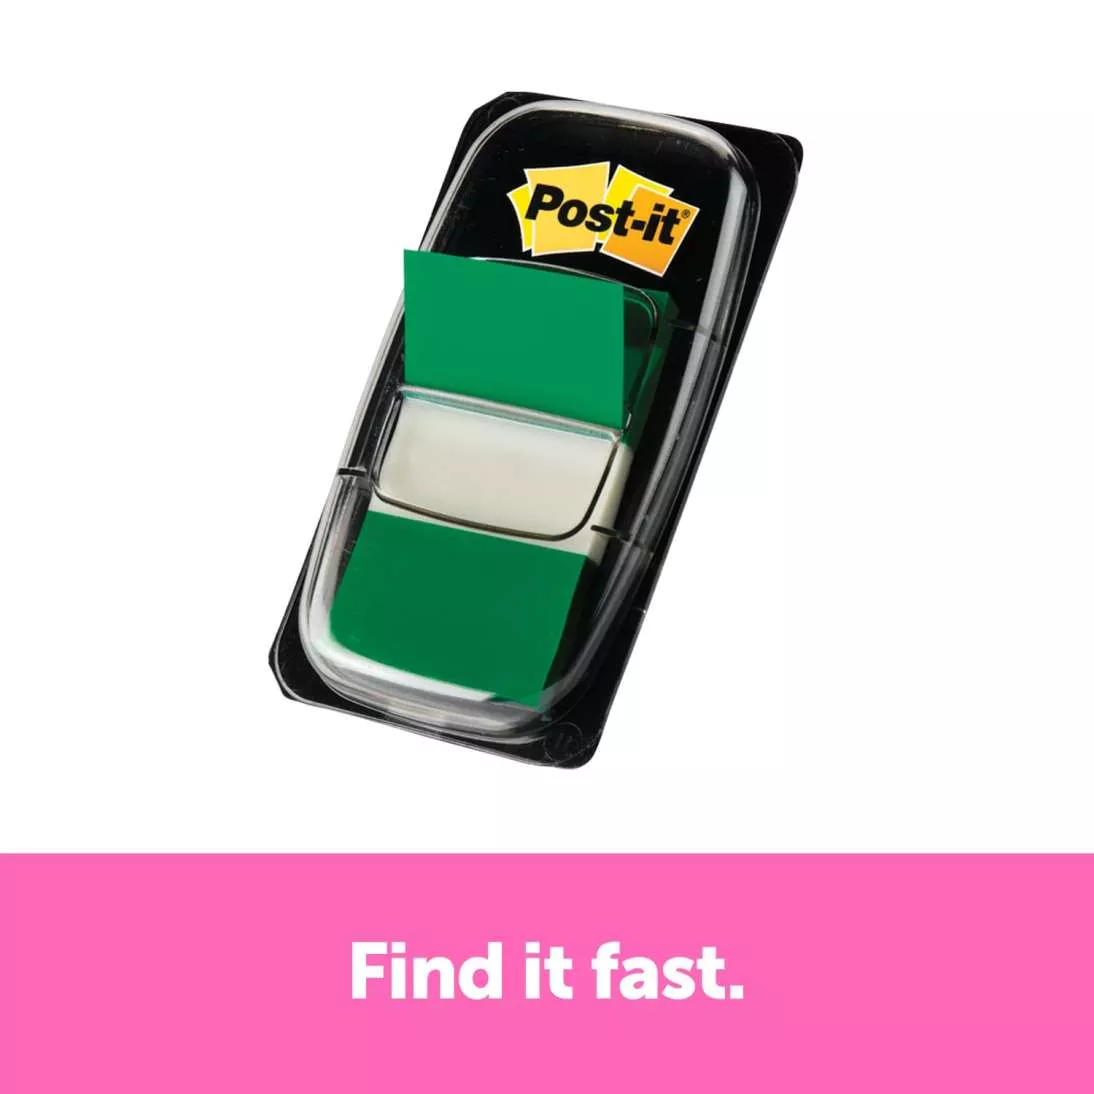 Post-it® Flags 680-GN12, 1 in. x 1.7 in. (25,4 mm x 43,2 mm) Green